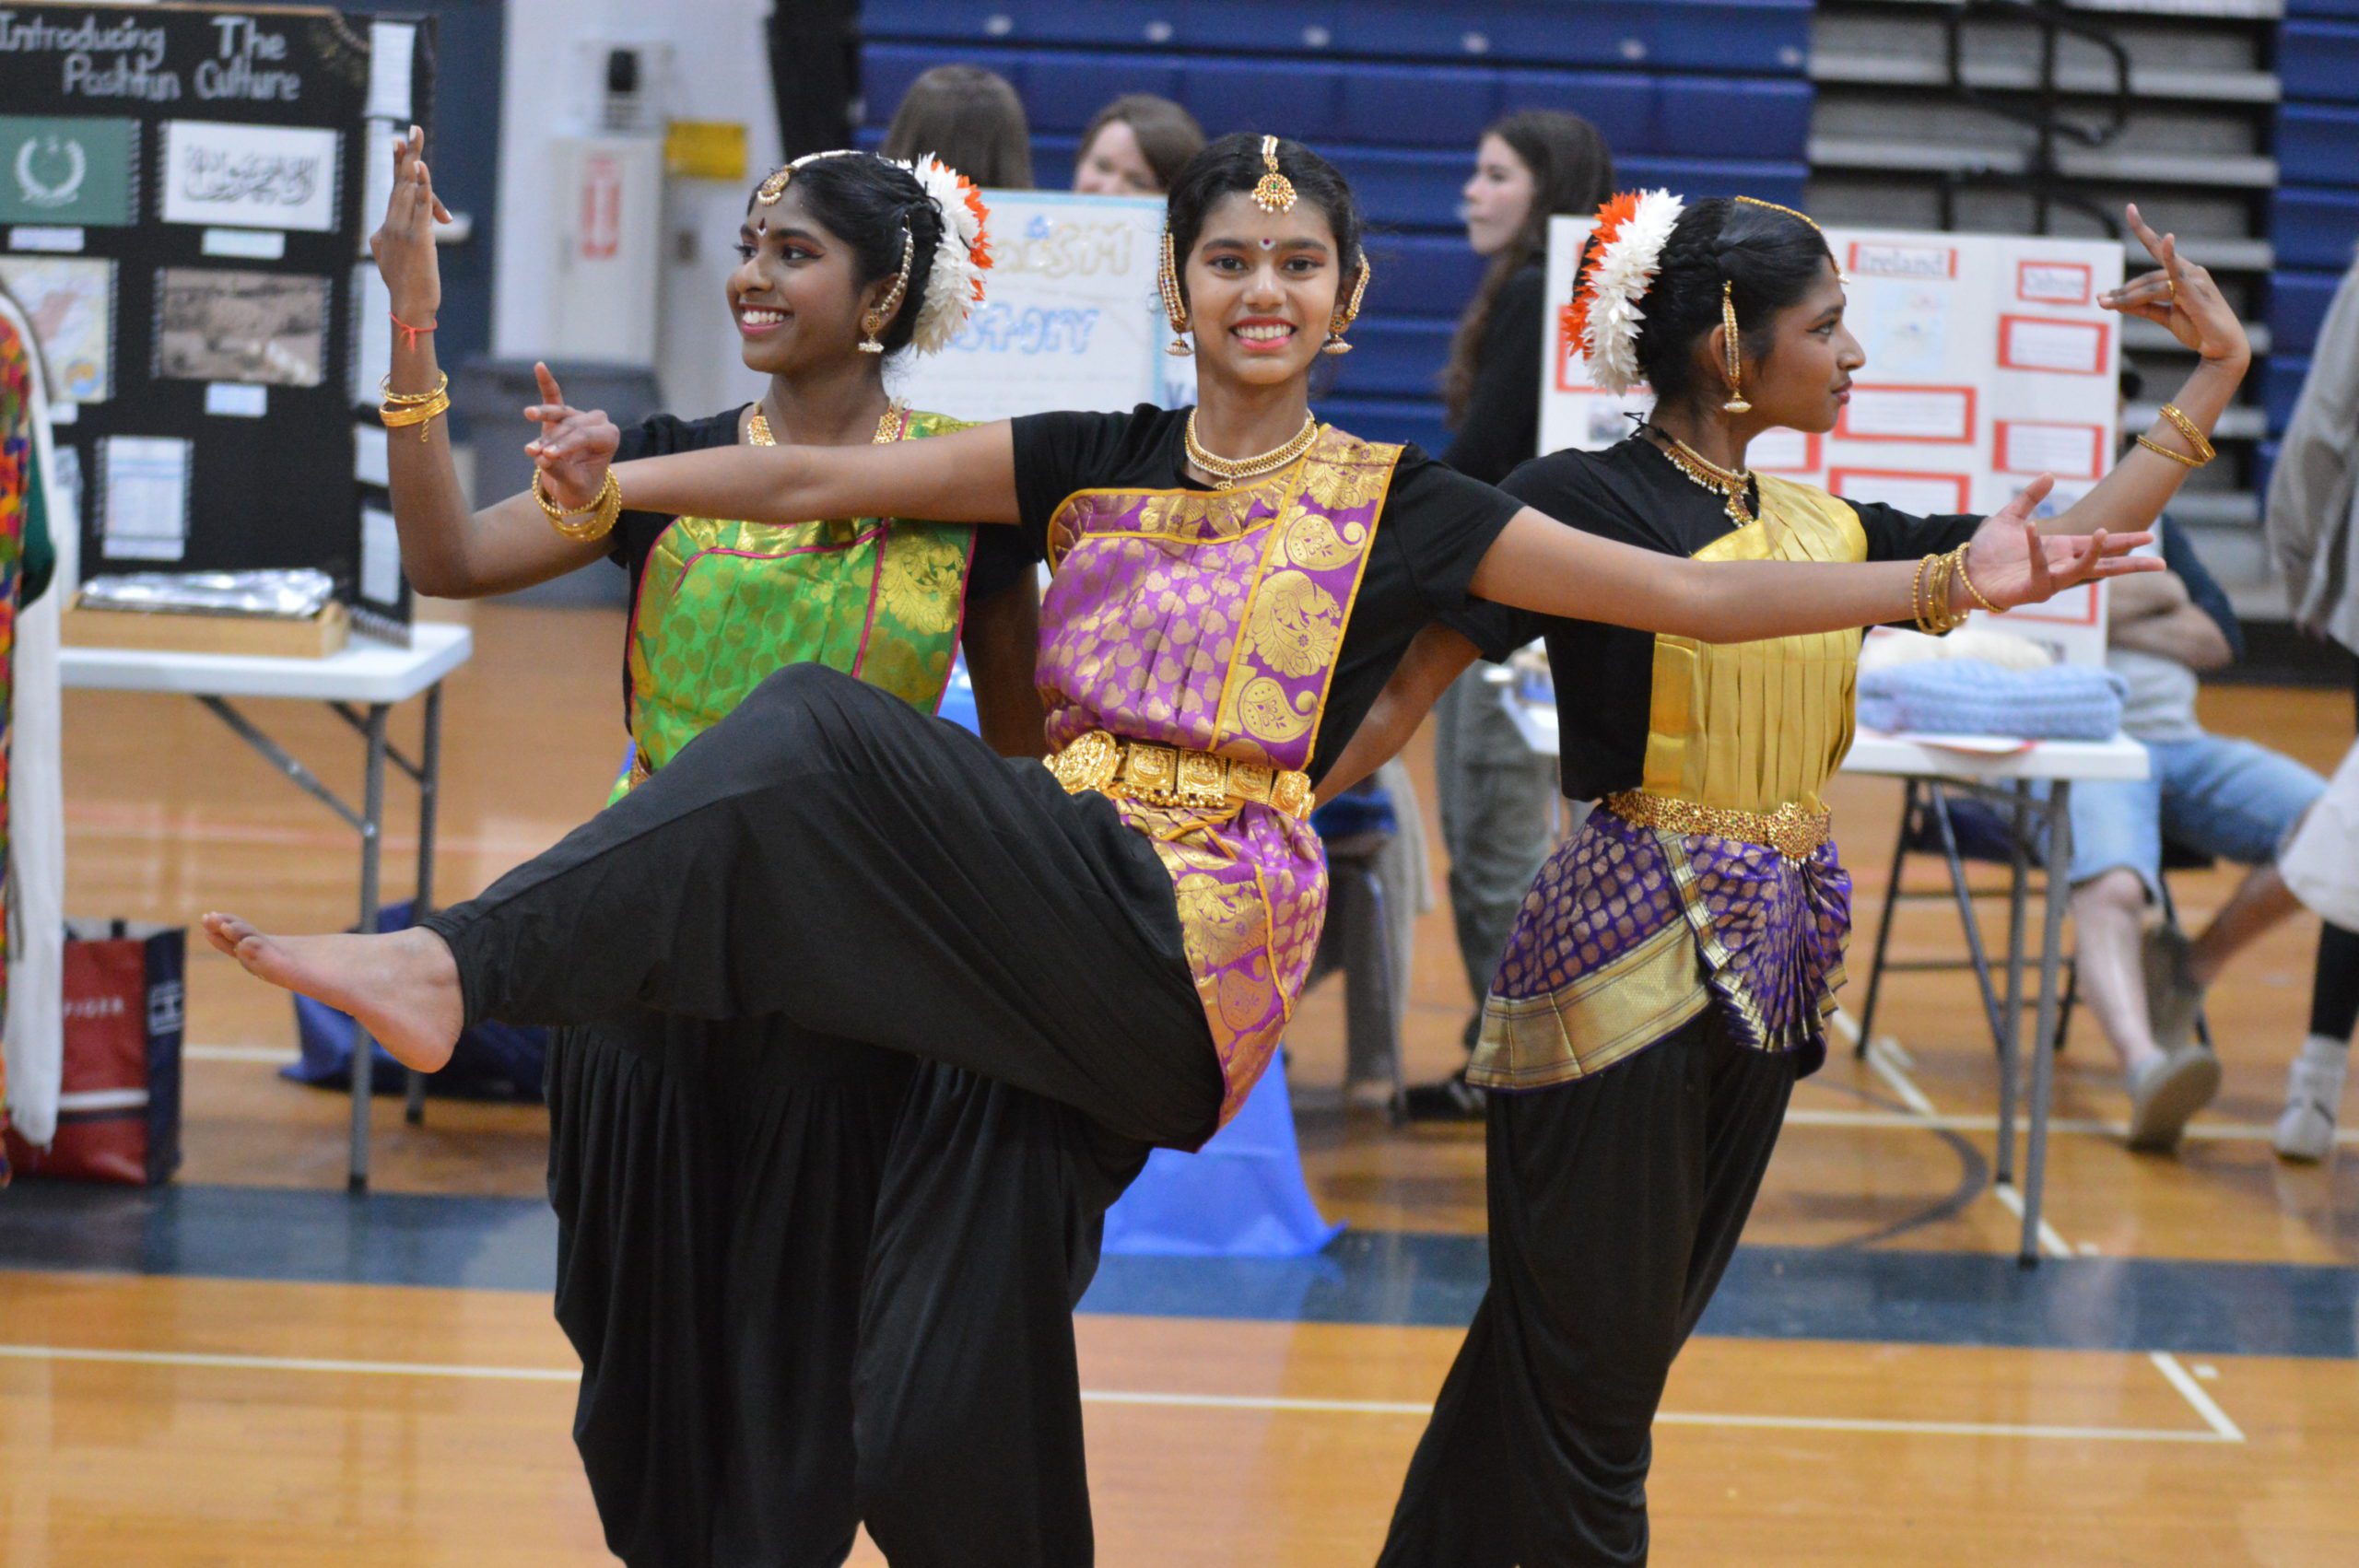 Students performing at the Multicultural and Tolerance Fair at Columbia High School.